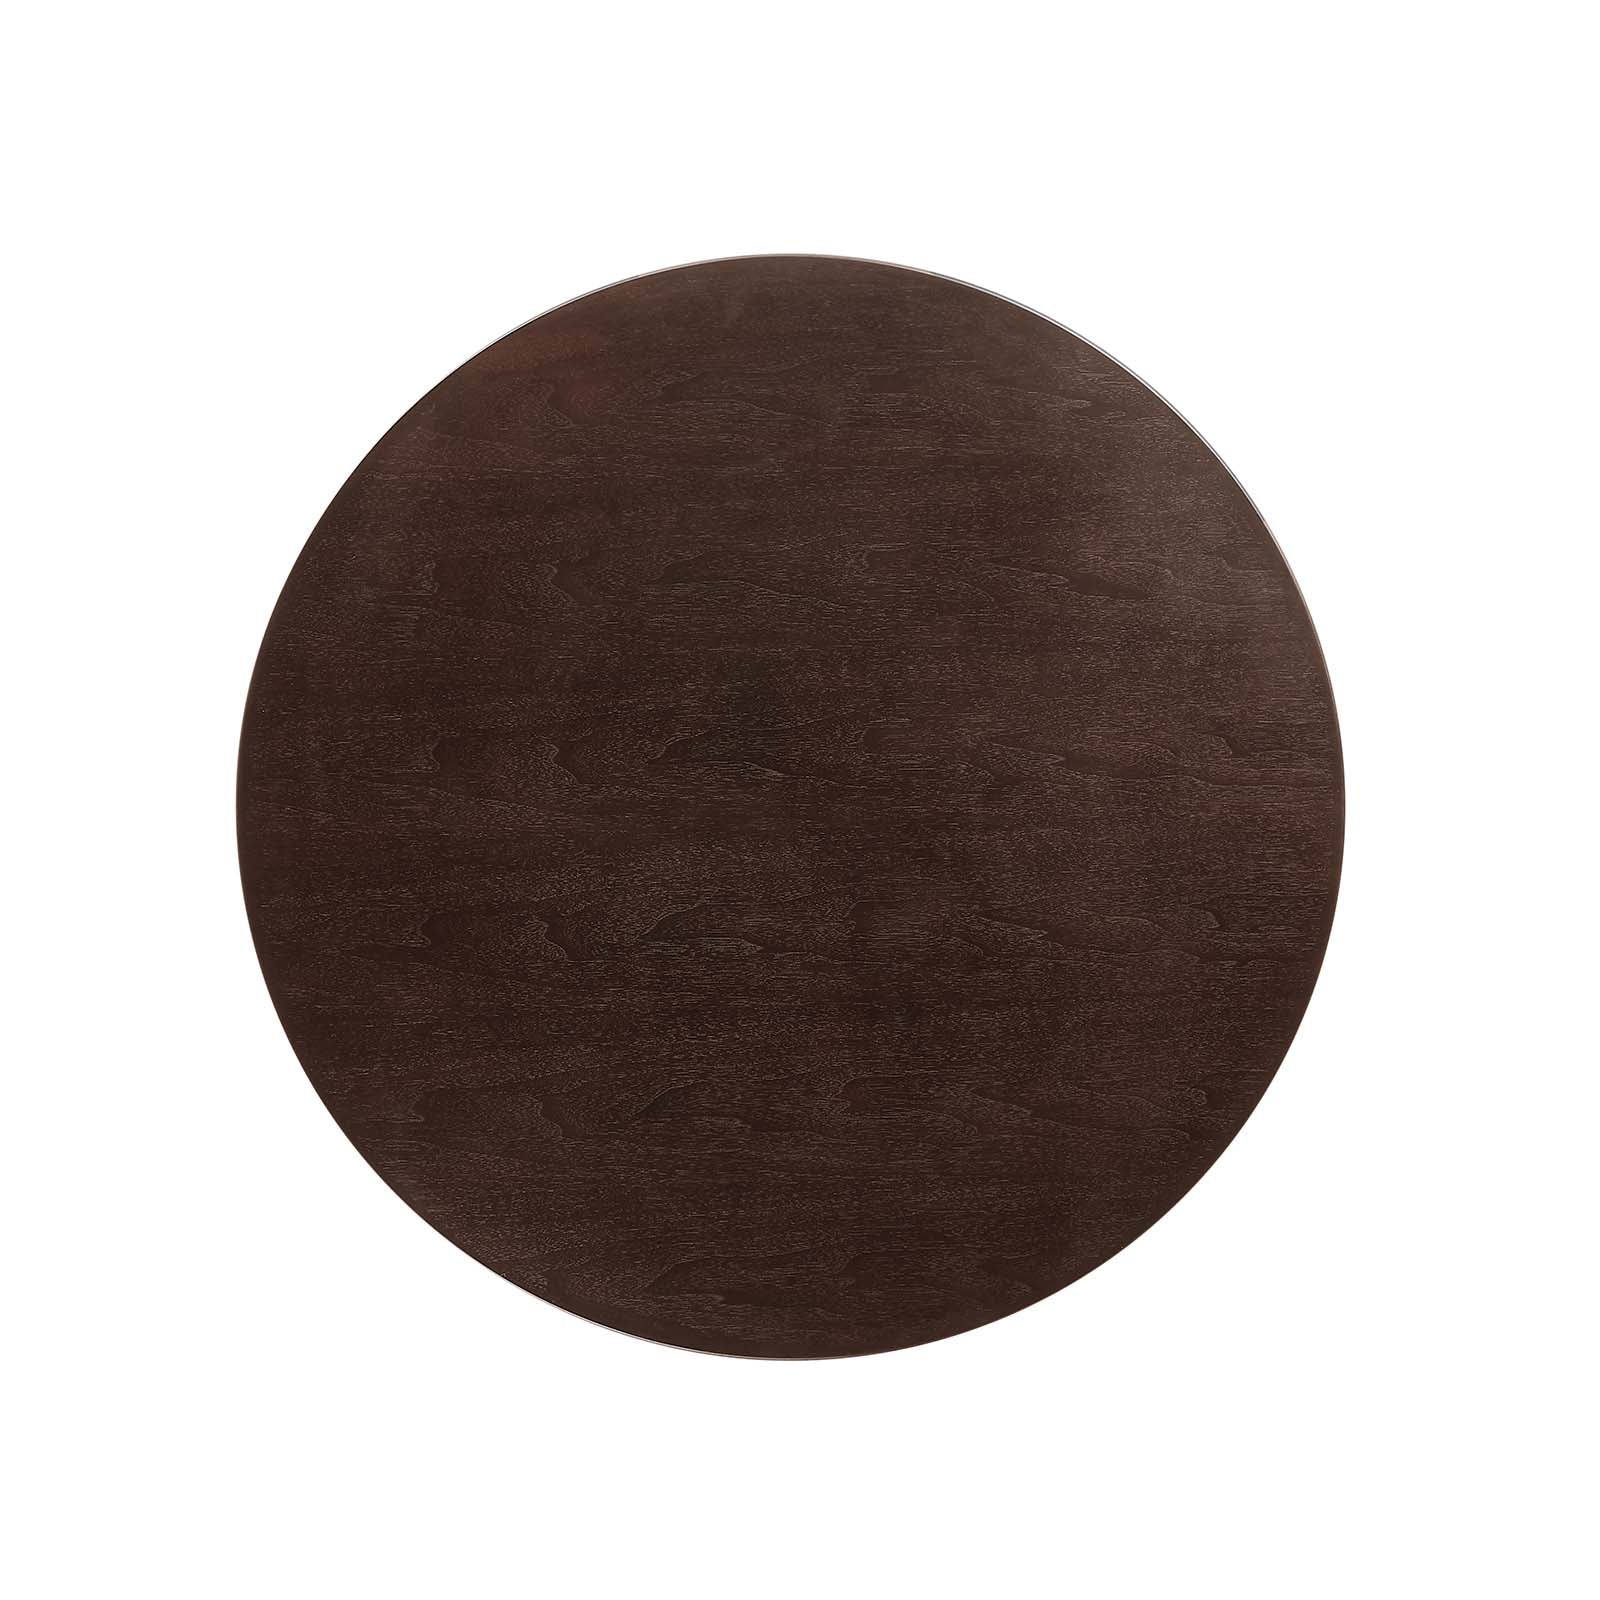 Modway Dining Tables - Lippa-36"-Round-Wood-Dining-Table-Black-Cherry-Walnut